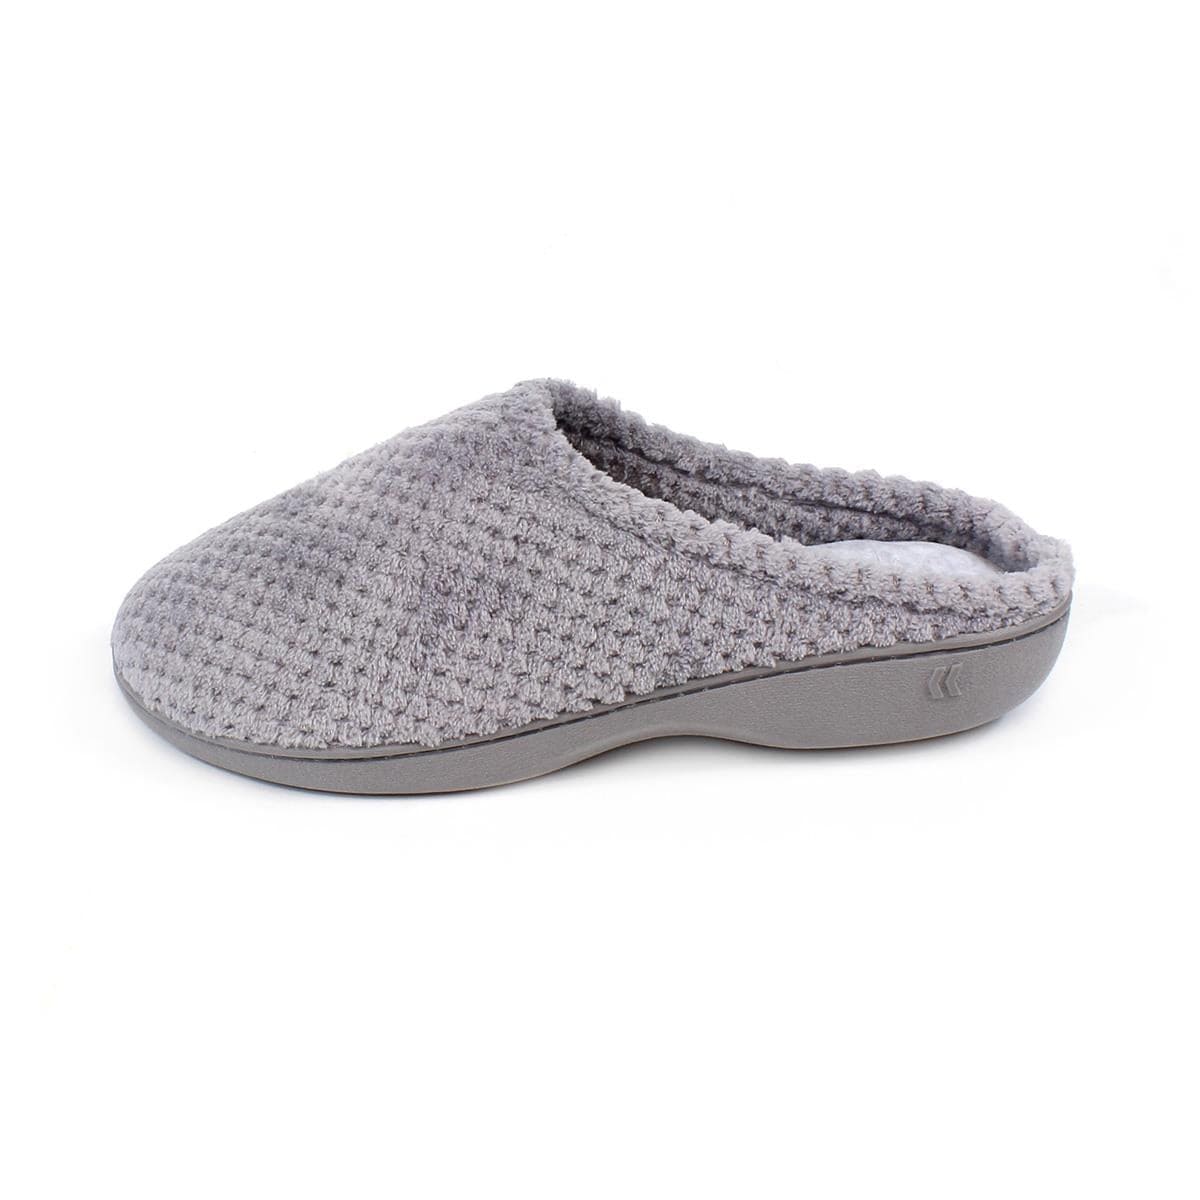 Totes Isotoner Ladies Popcorn Terry Mule Slippers Grey